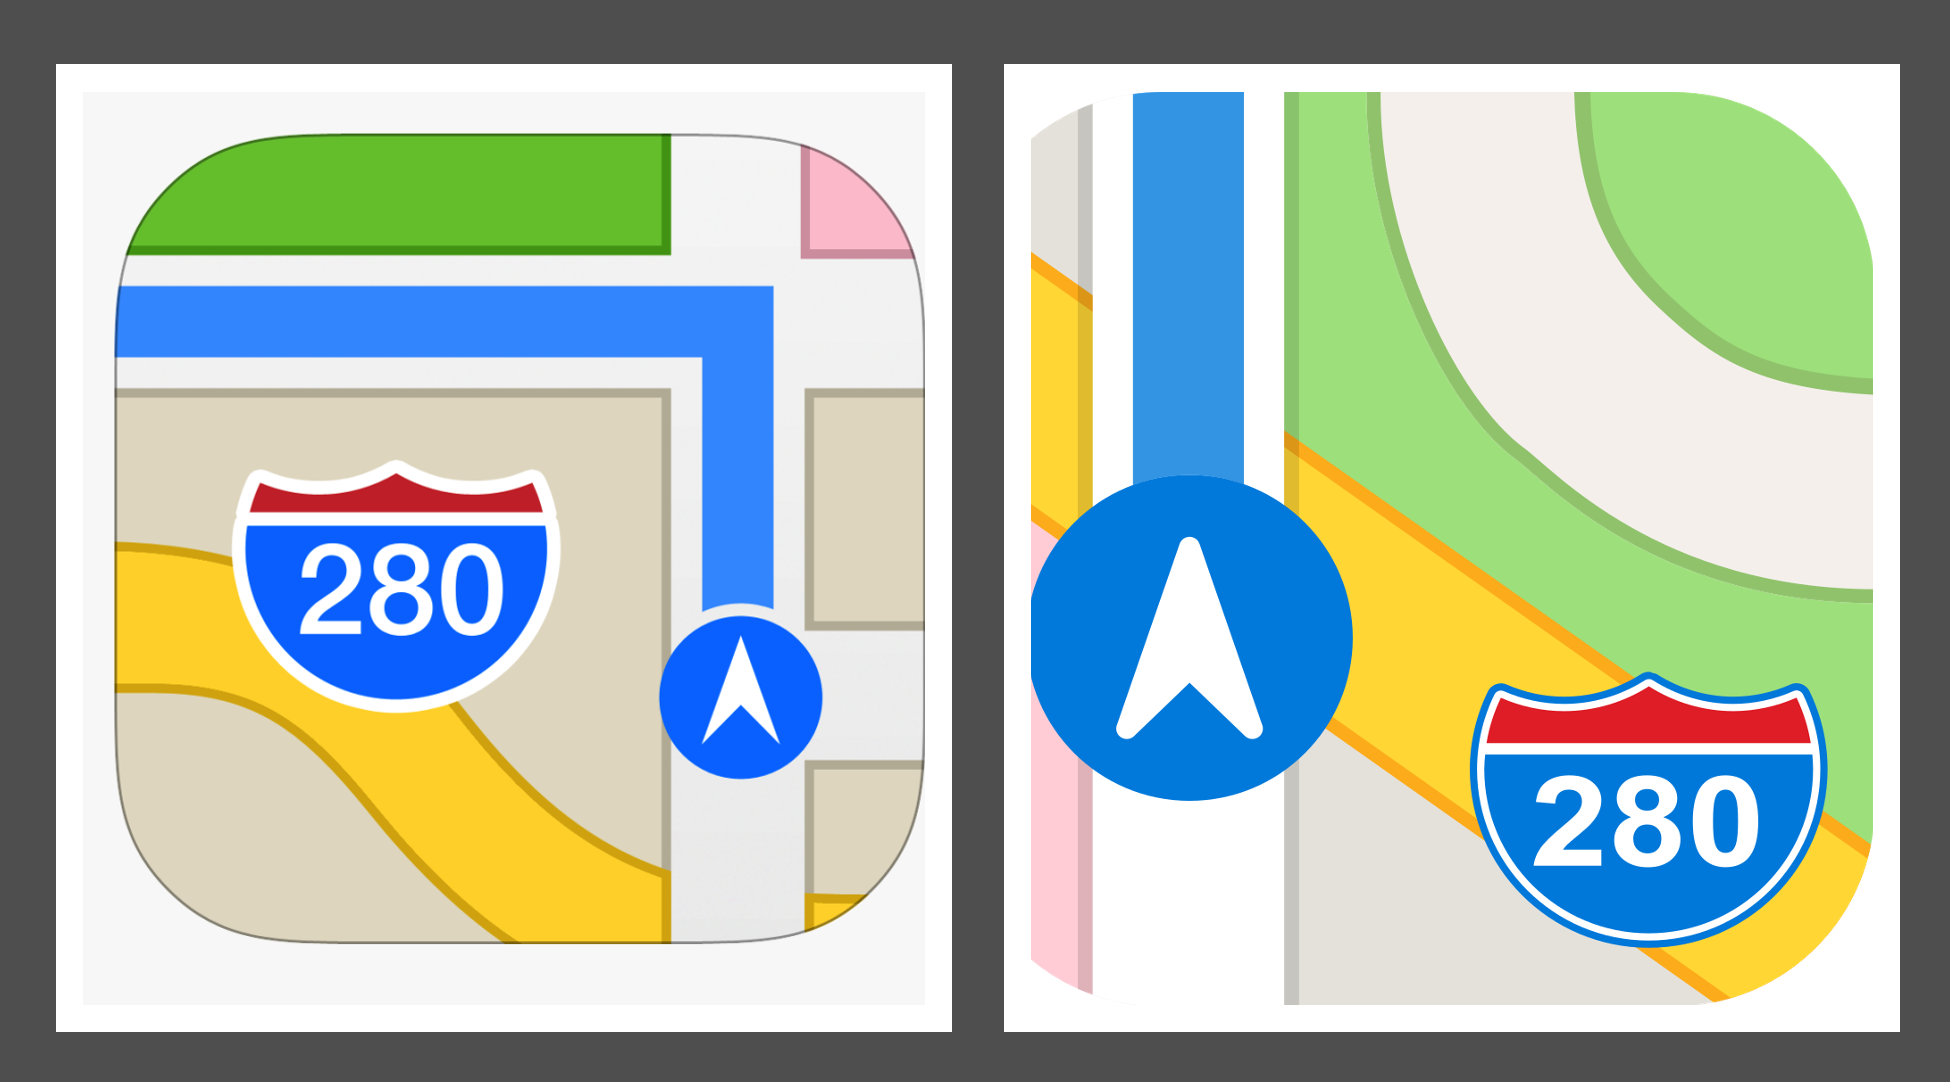 Apple Maps Arrives, Wix's Big Numbers, Radical FTC Privacy Change (Maybe)